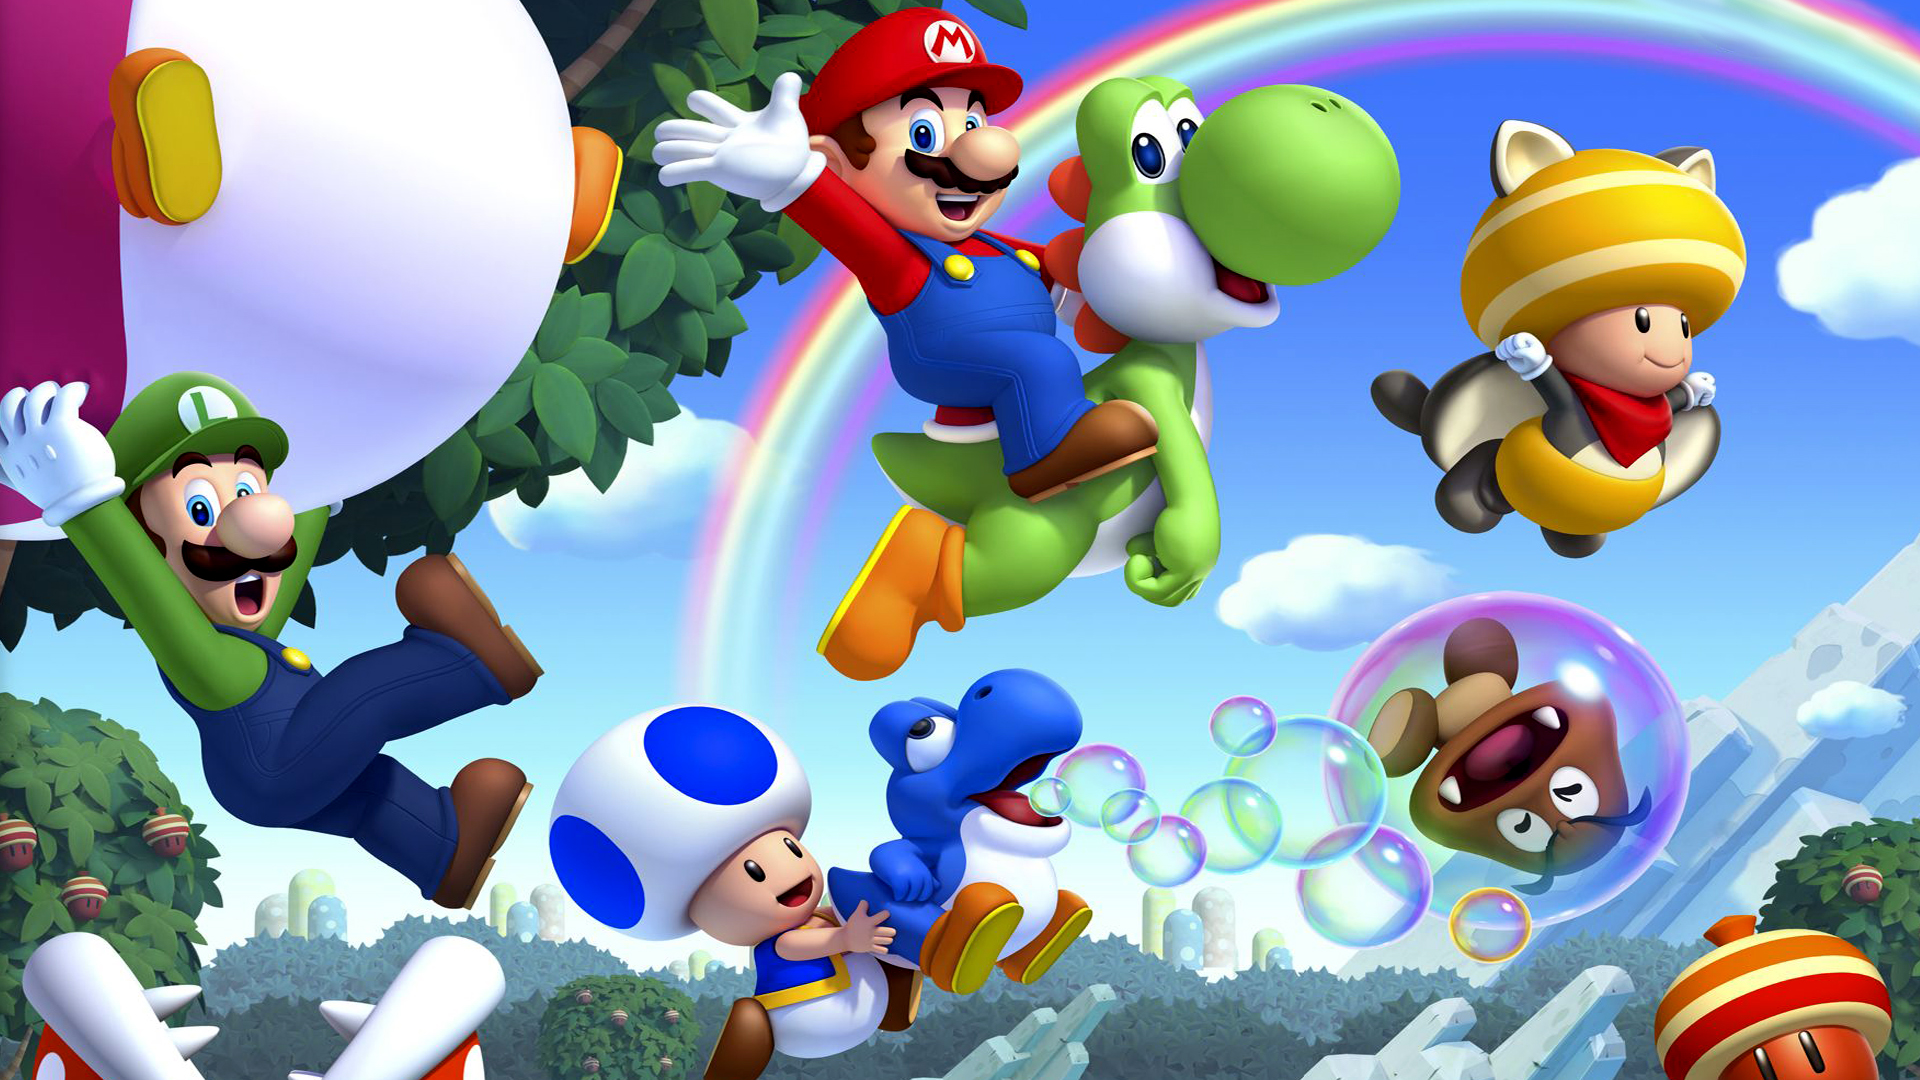 Super Mario Bros. Backgrounds, Pictures, Images